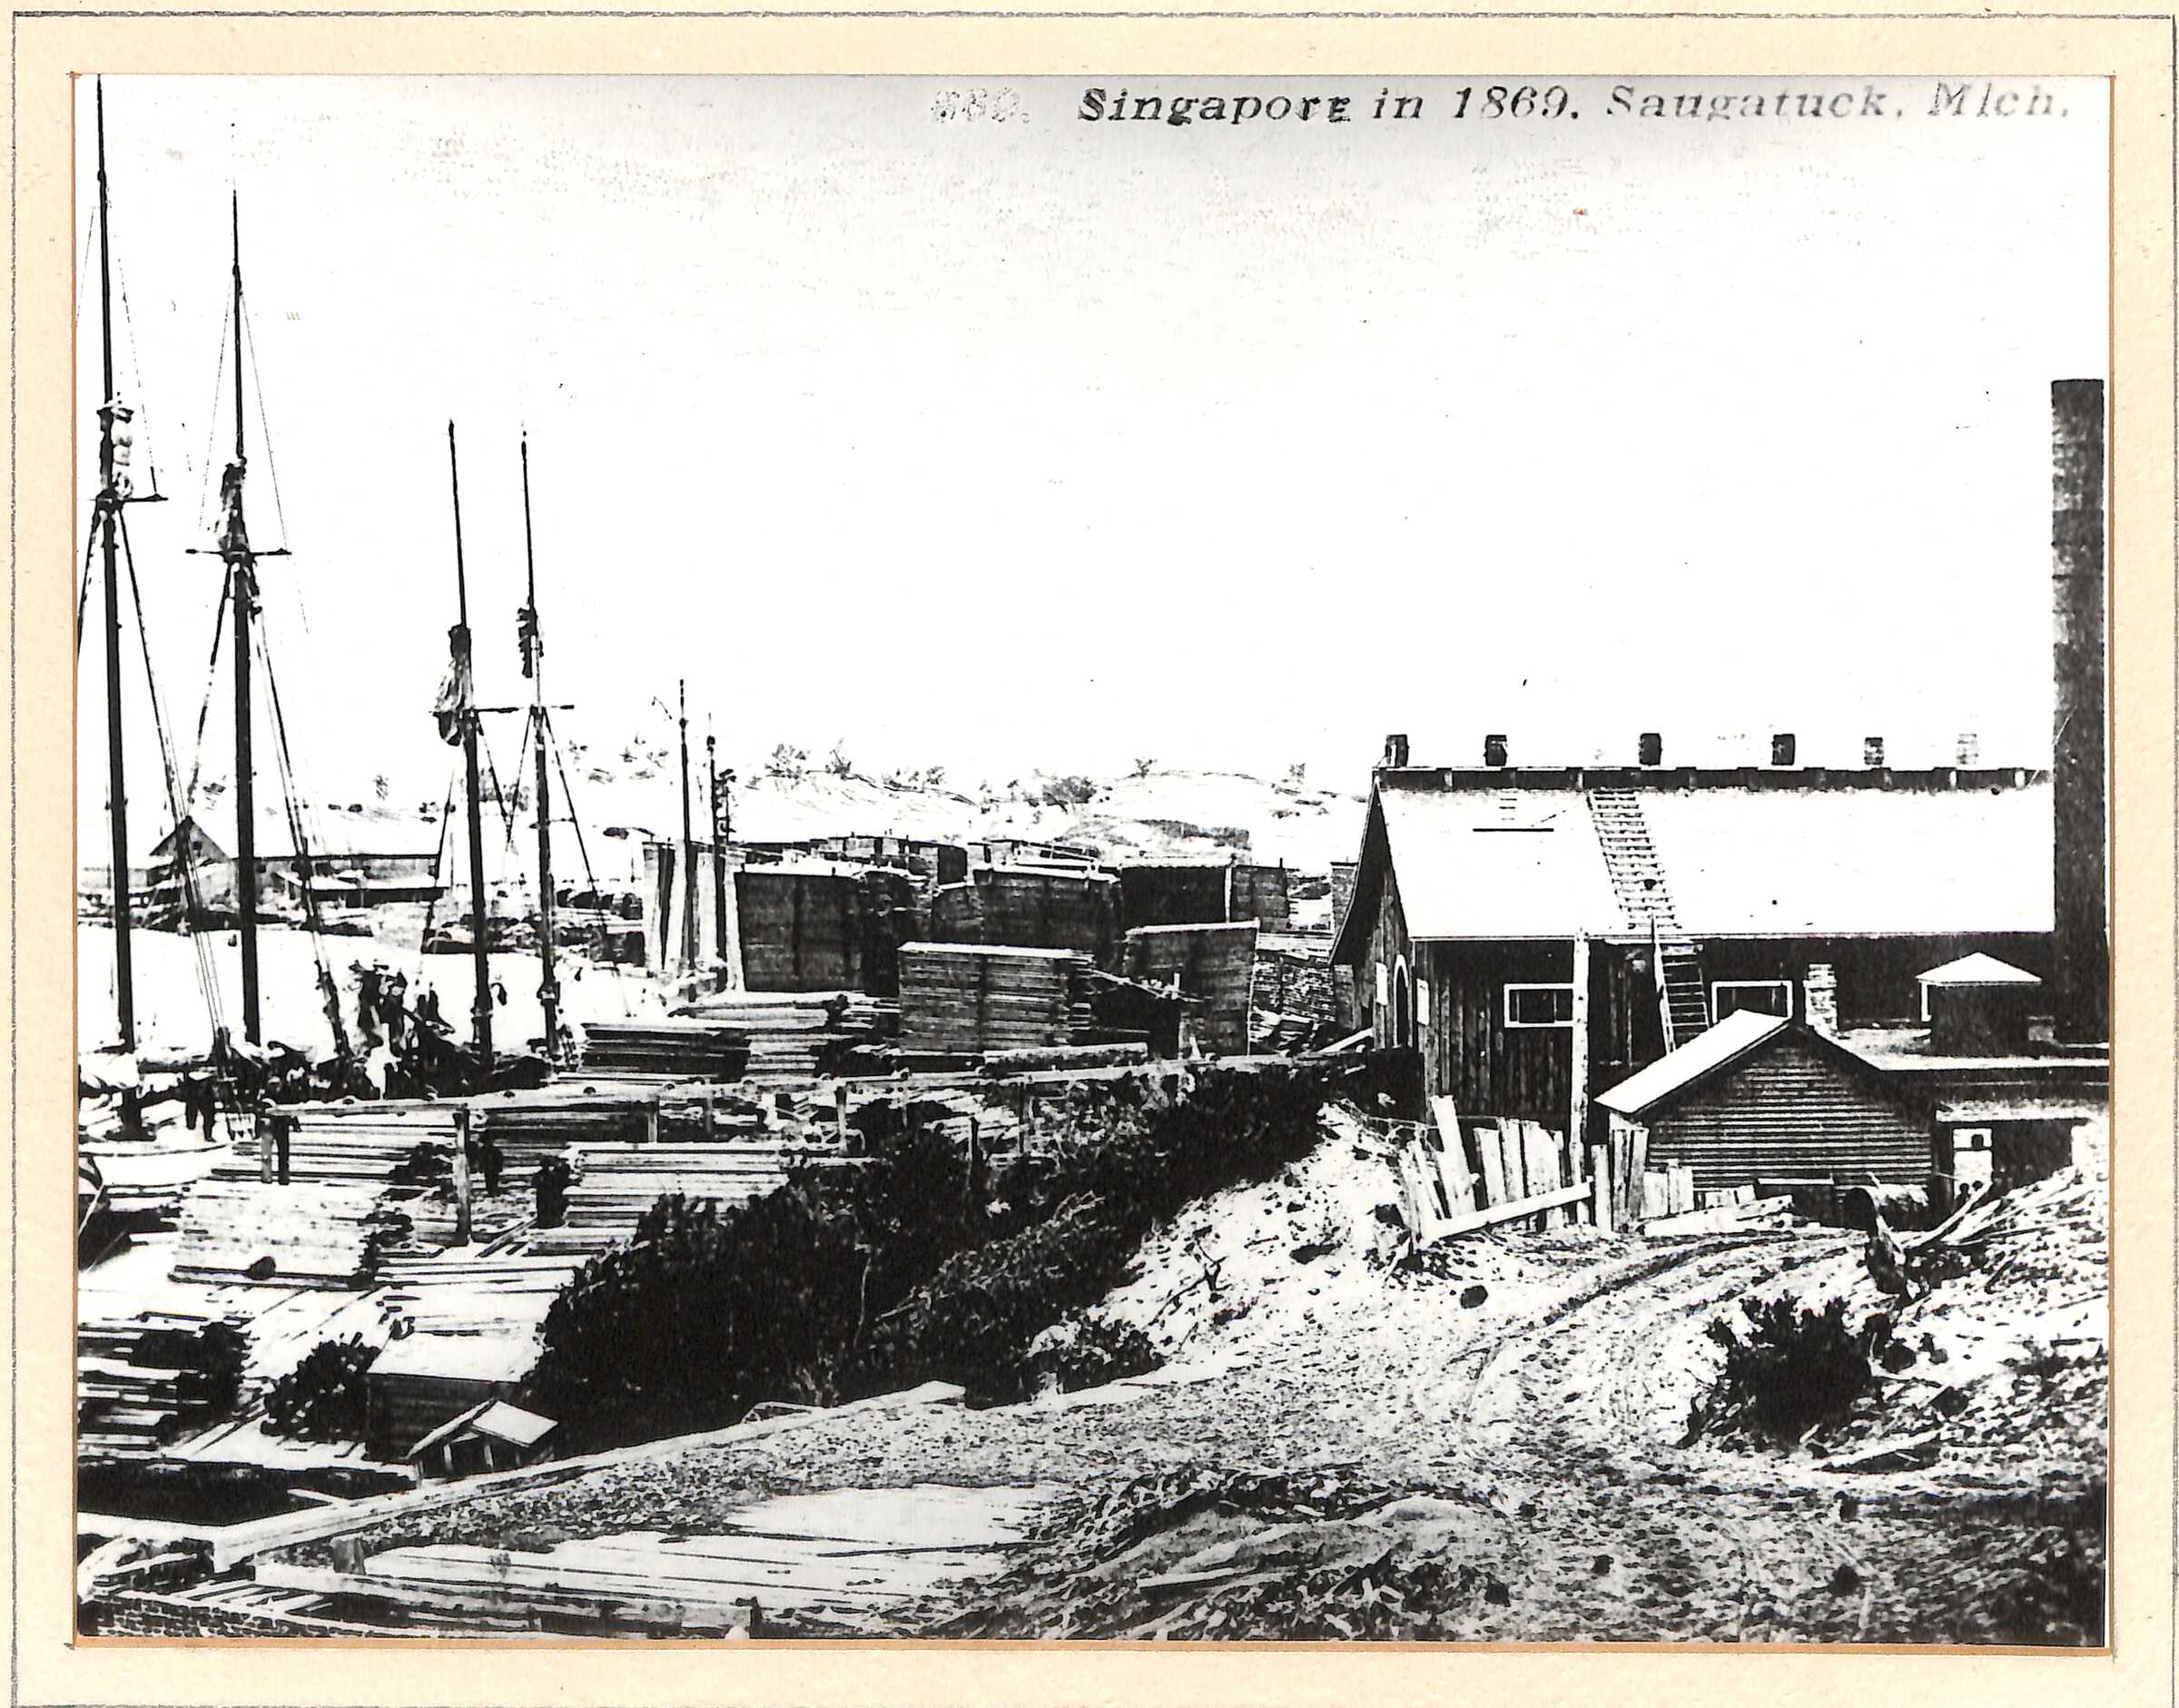 The Mill at Singapore, 1869